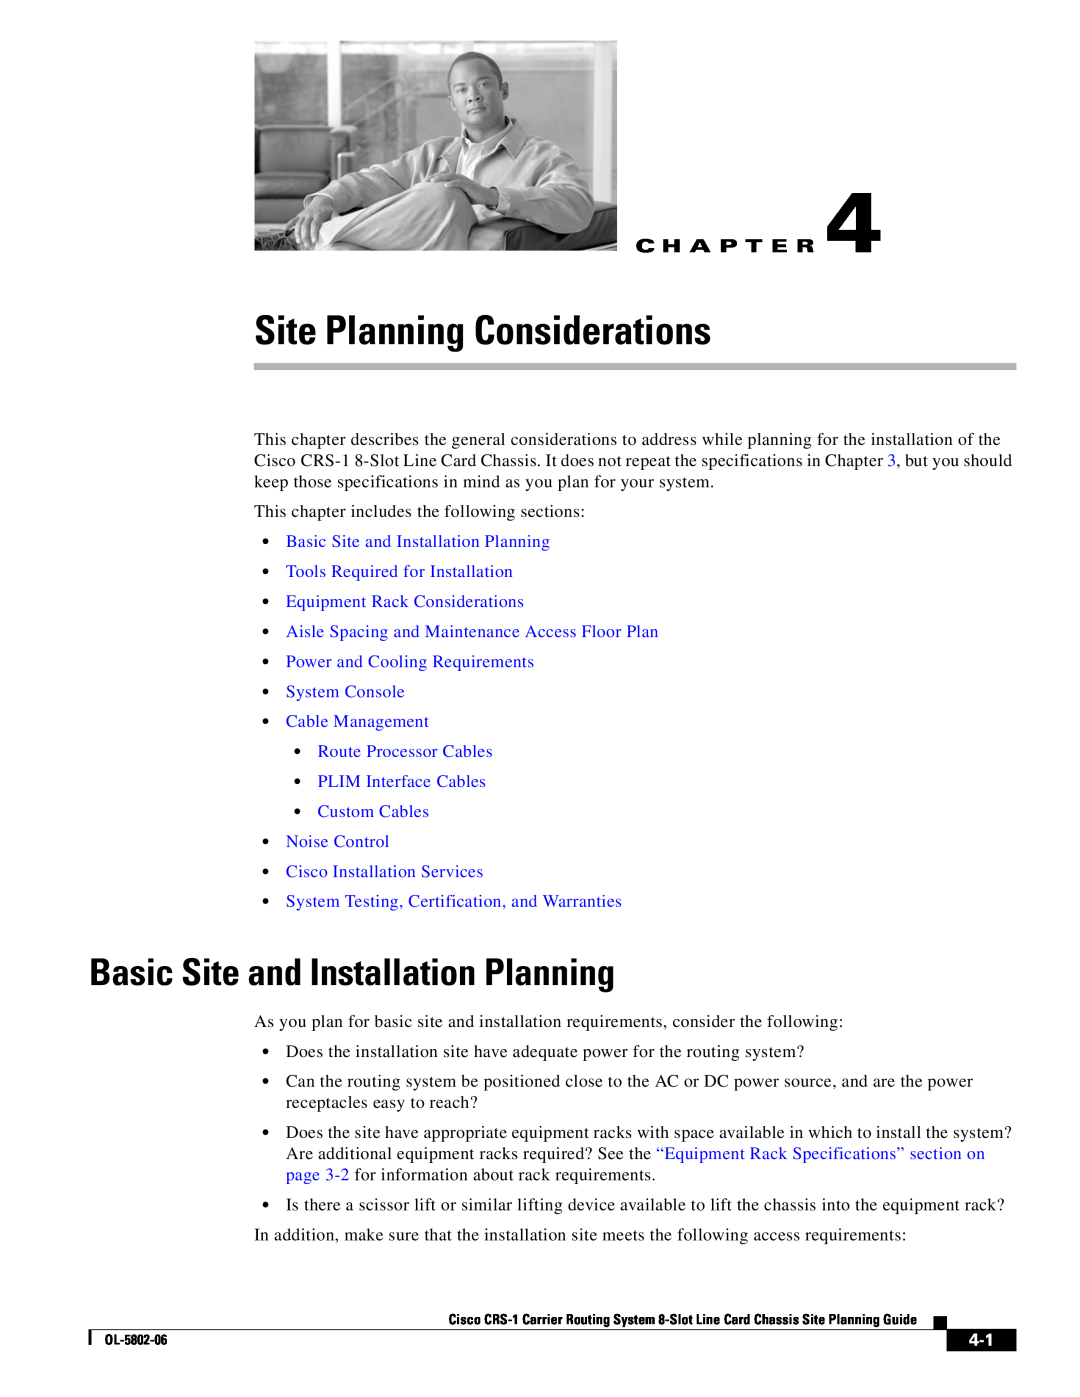 Cisco Systems CRS-1 Site Planning Considerations, Basic Site and Installation Planning, Equipment Rack Considerations 